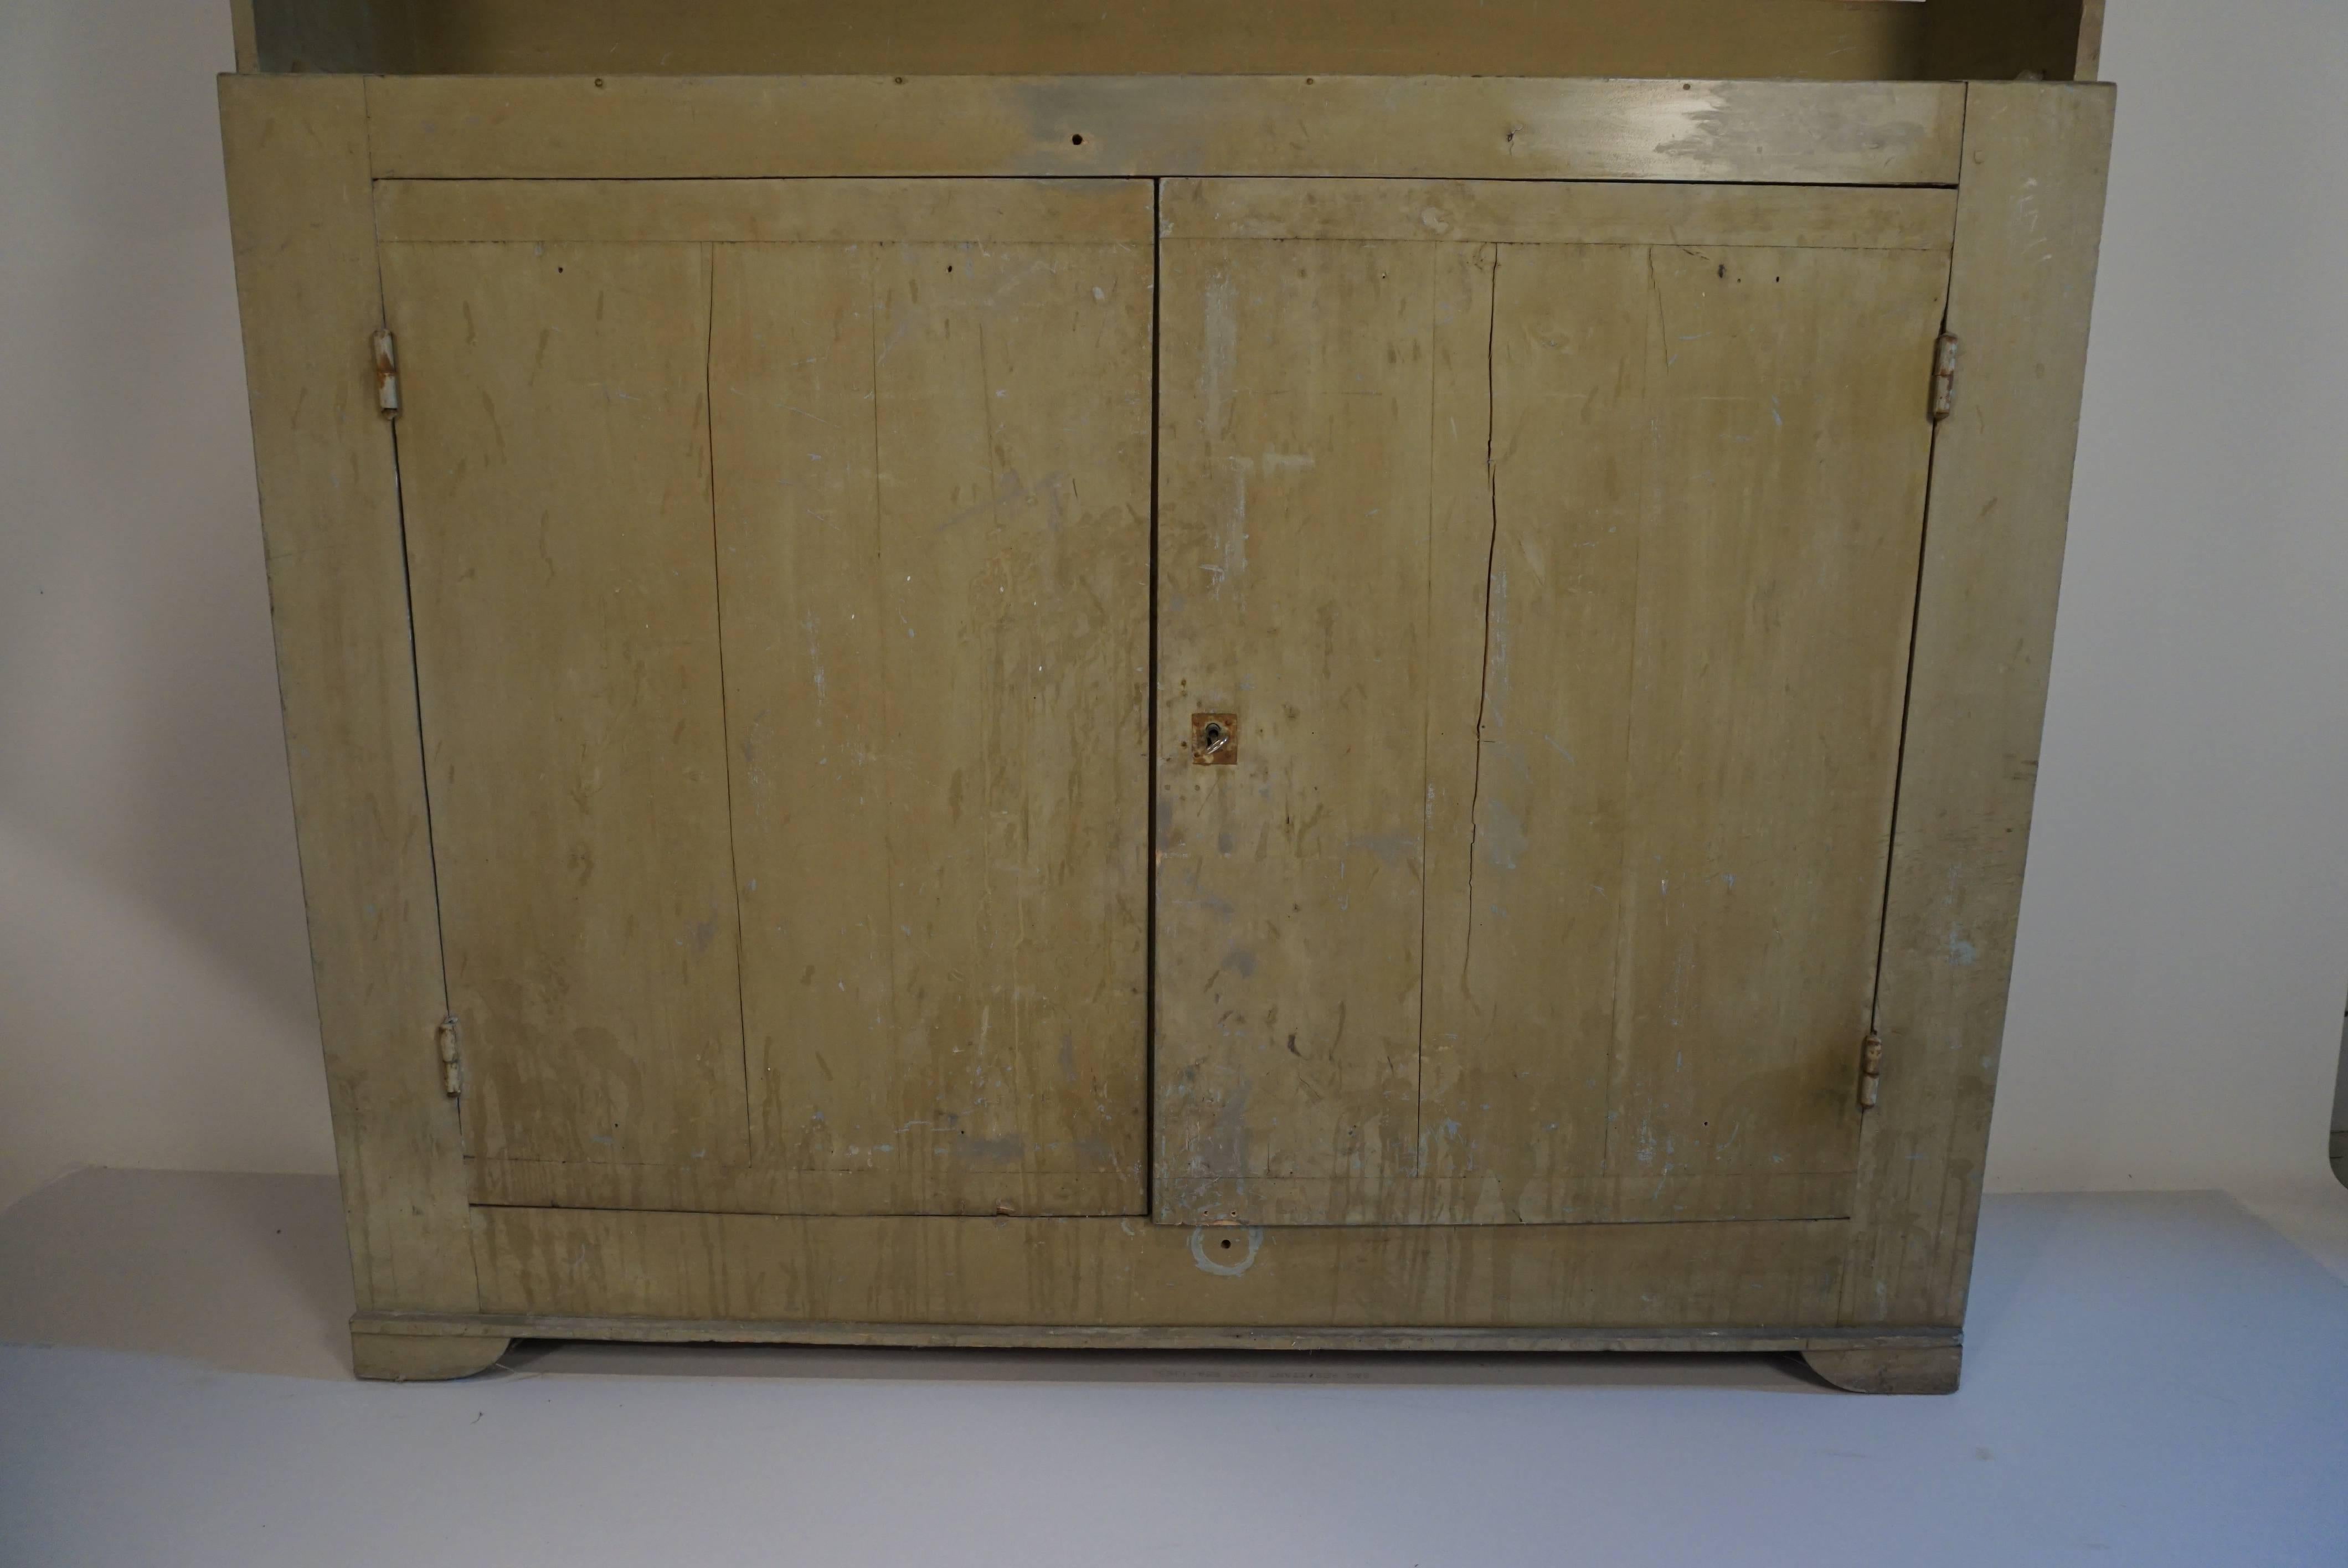 An unusual form with a long top board creating a winged effect.
Beautiful pale green paint.
Wonderful for storage and display.
Width of cupboard (excluding top) is 57 inches.